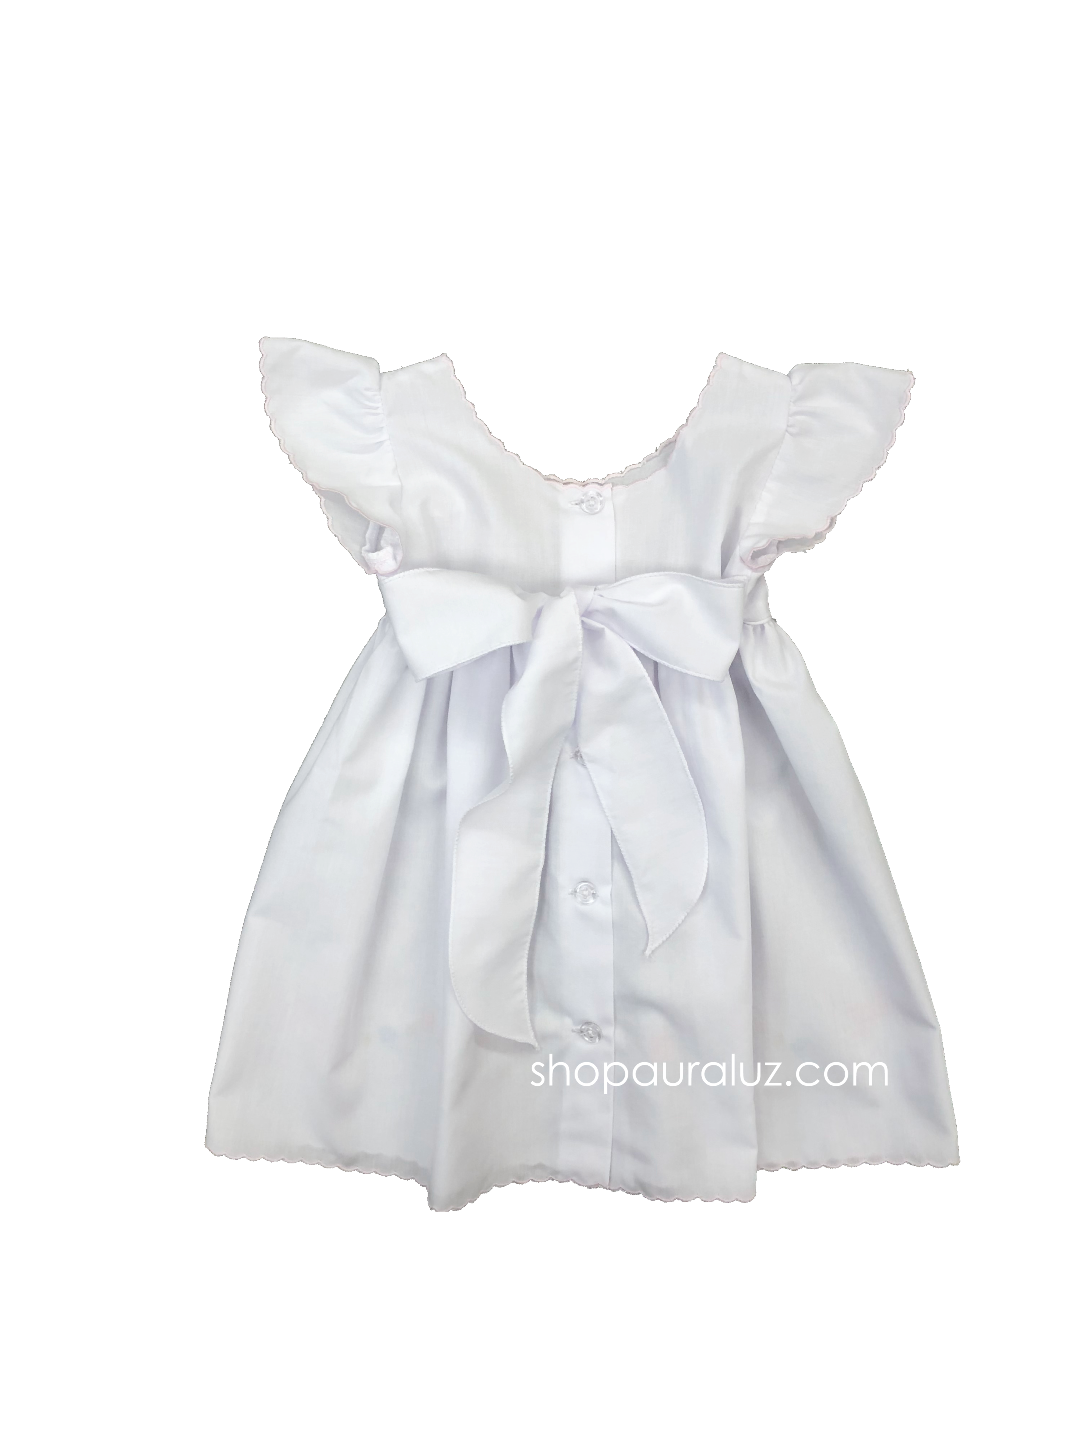 Auraluz Pinafore...White with embroidered tiny bows